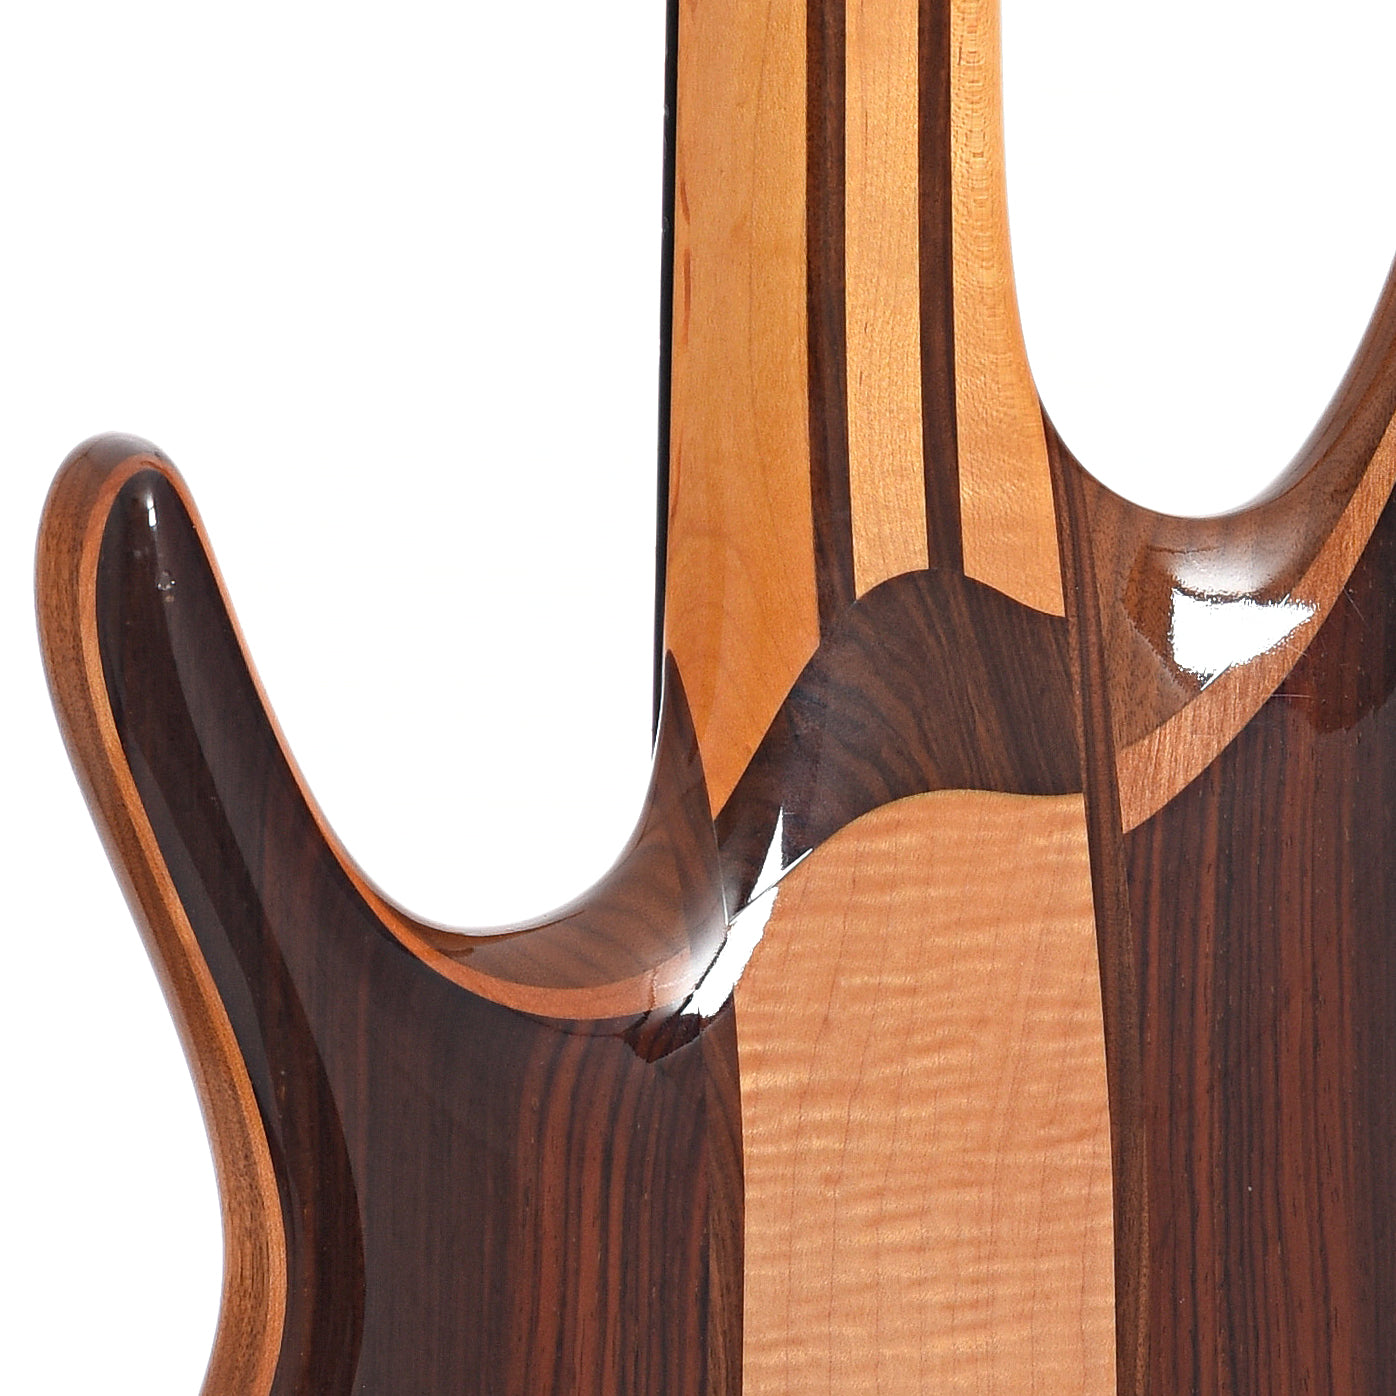 Neck joint of Ken Smith BSR4 Elite 4-String Electric Bass